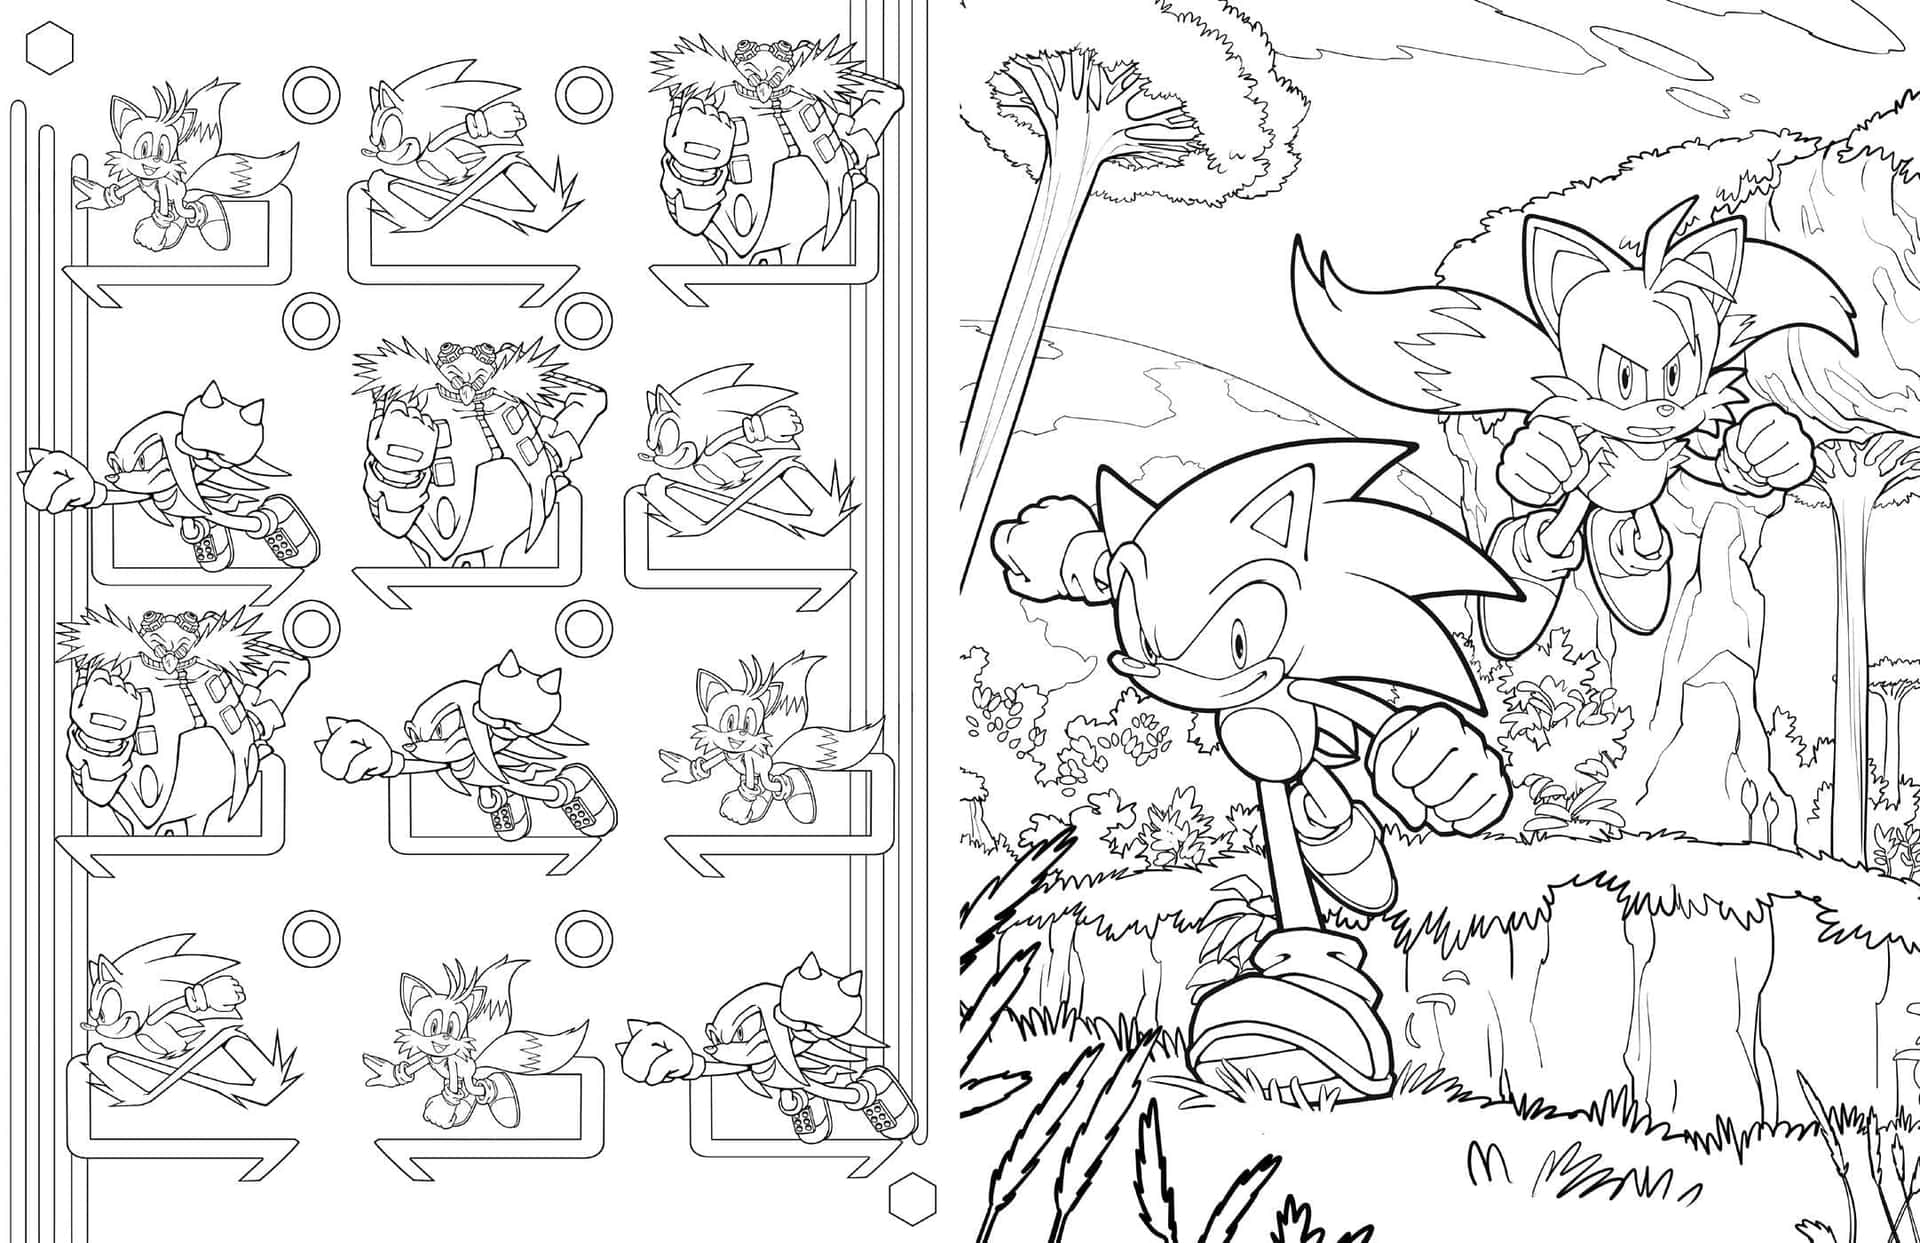 Download sonic coloring running with tails picture